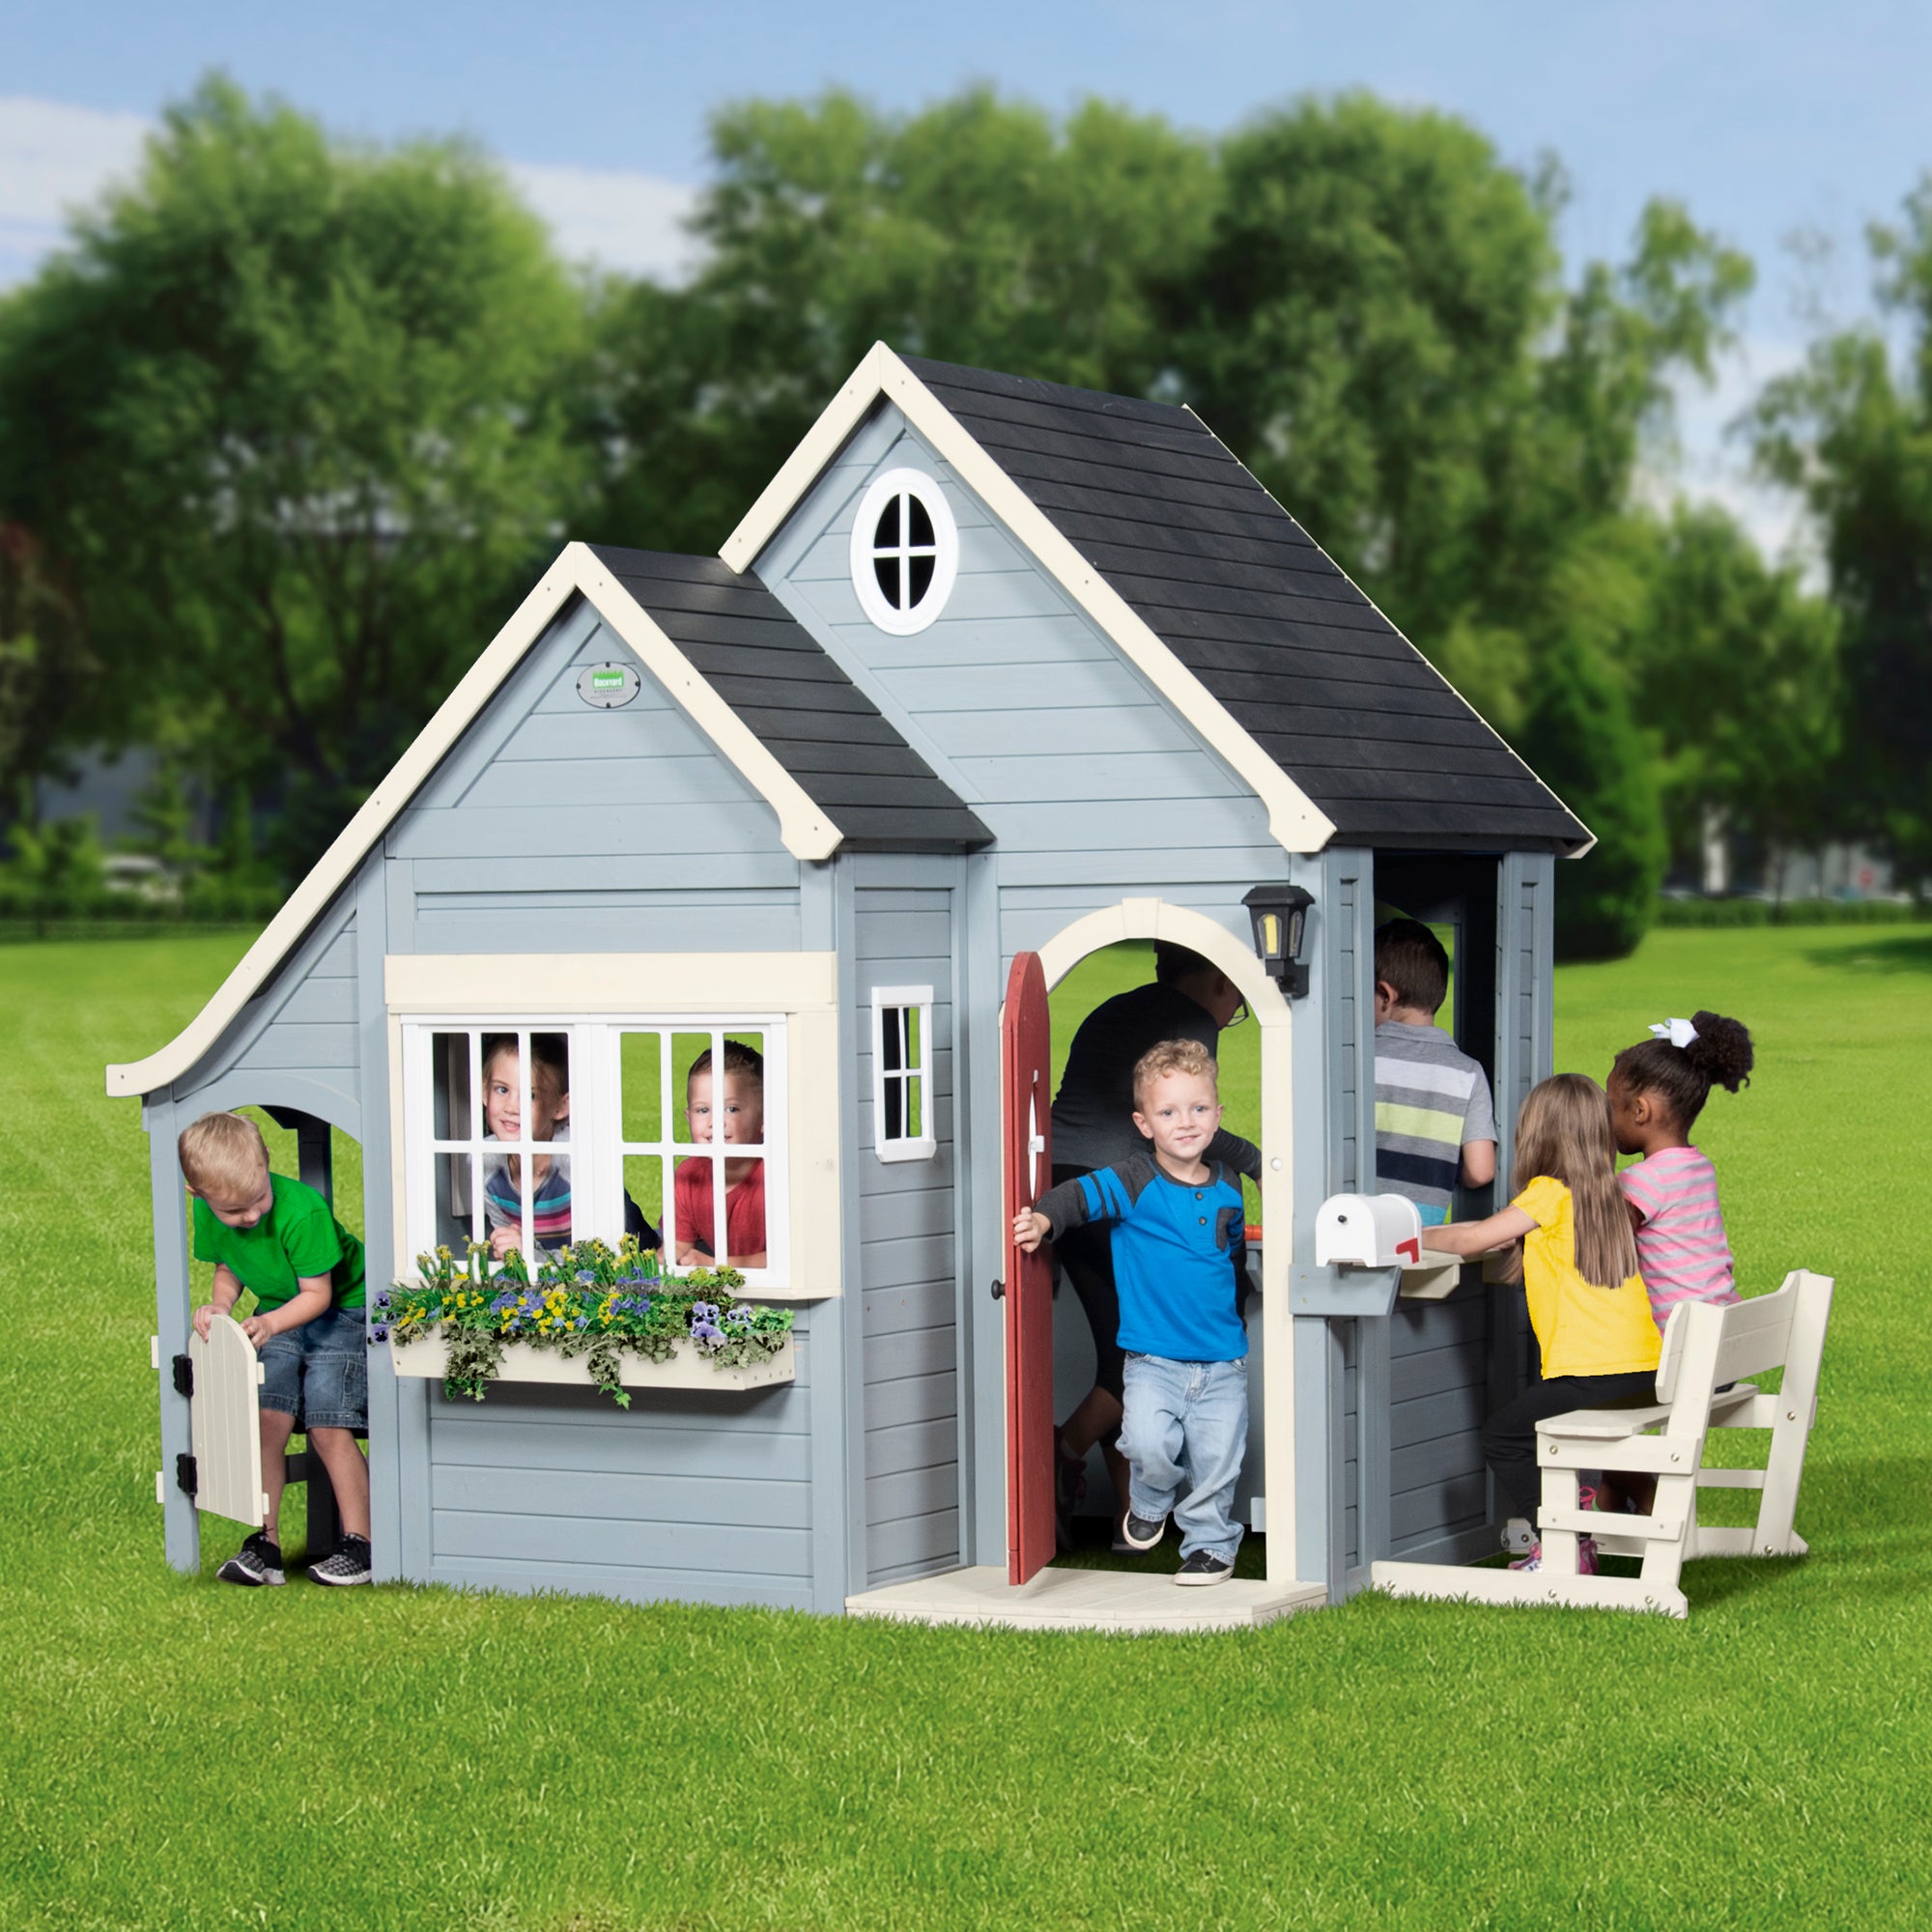 wooden cottage playhouse